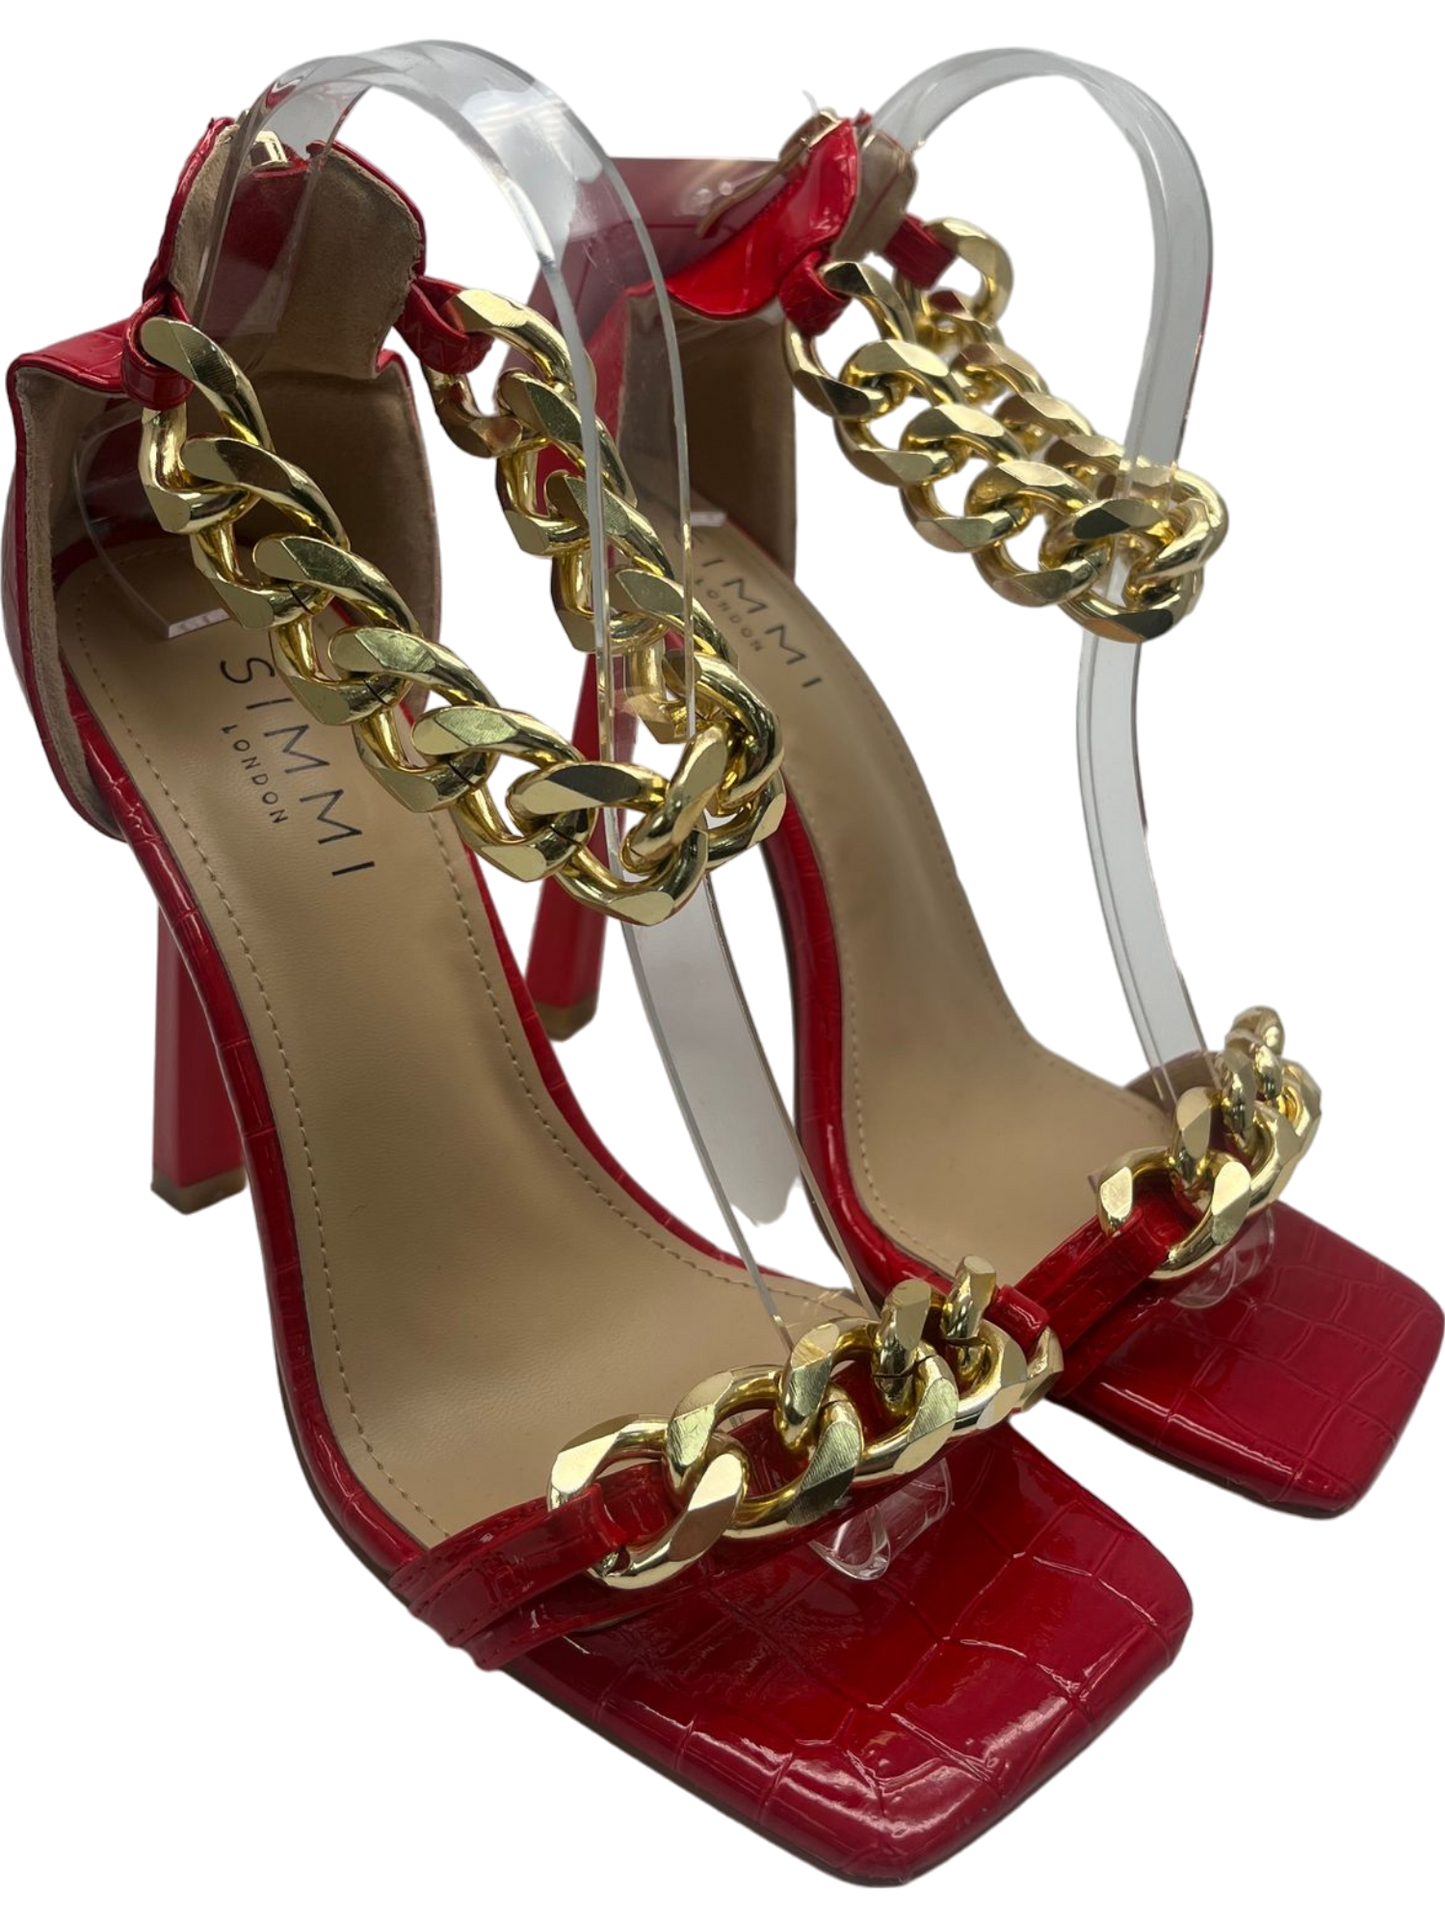 SIMMI LONDON Red Croc Effect High Heel Sandals with Gold Chain Detail UK 5